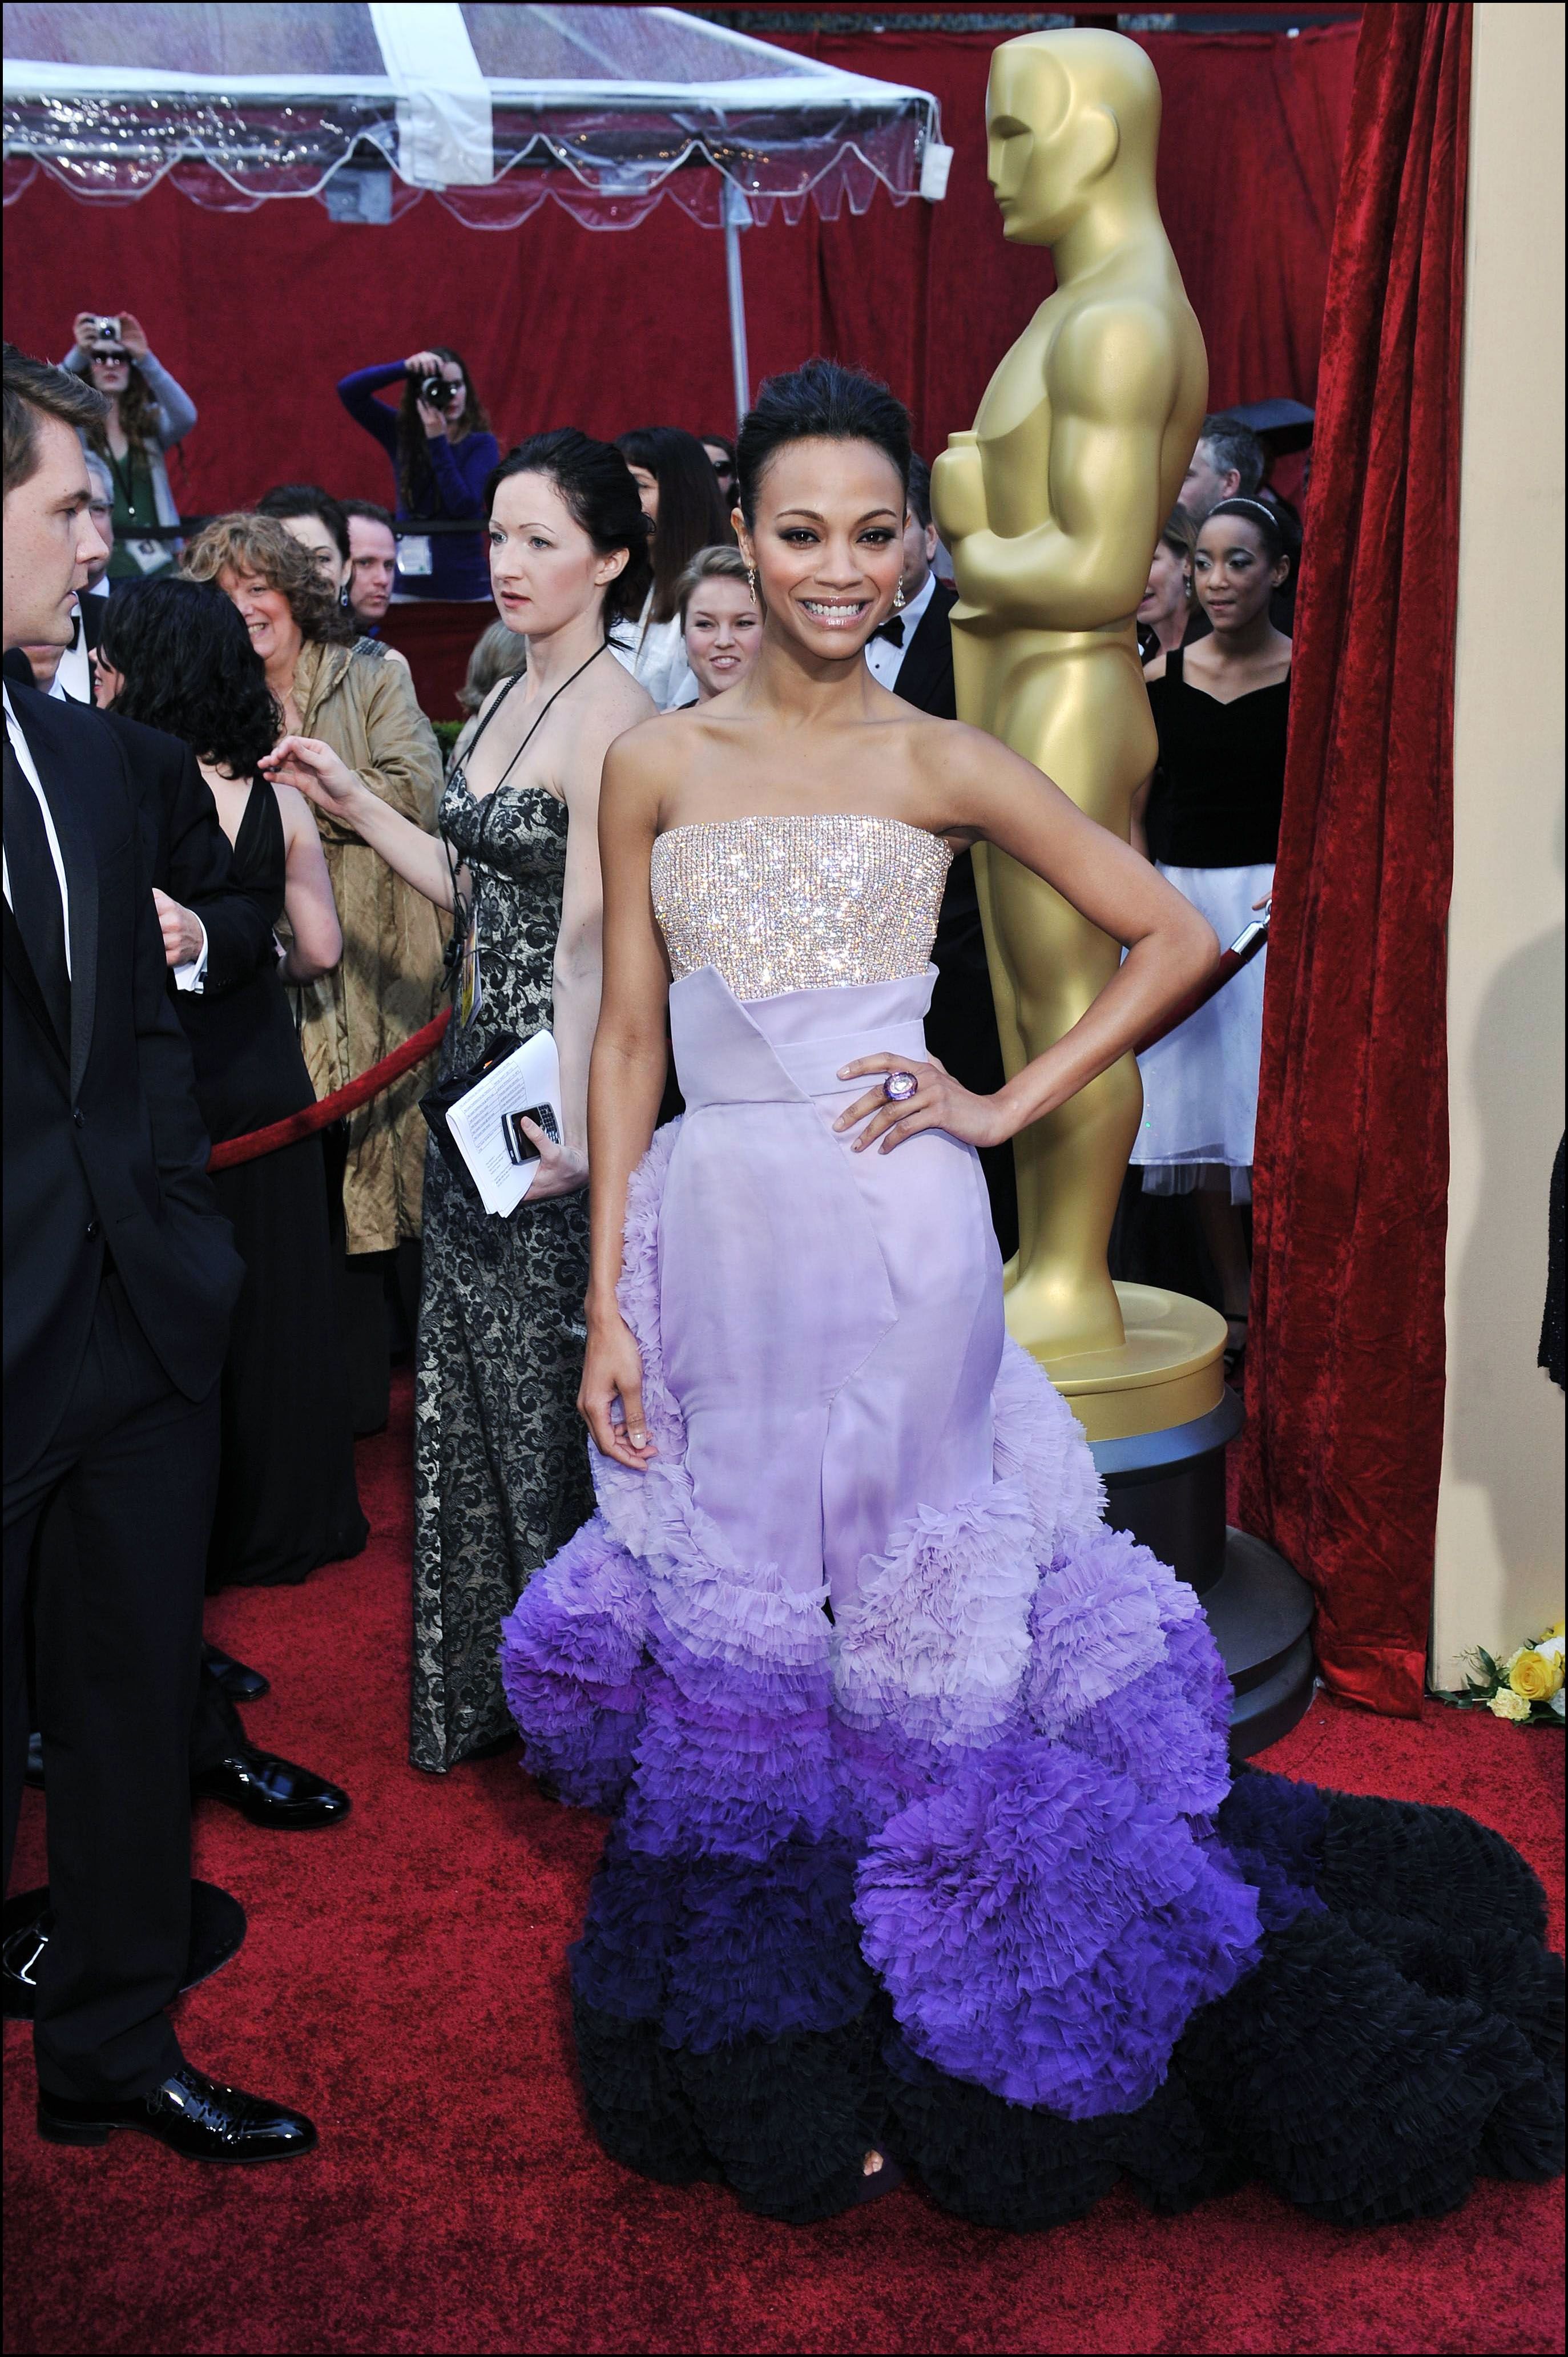 Zoe Saldana at the 82nd Academy Awards for the Oscars Ceremony on March 7, 2010 in L.A. | Photo: Getty Images